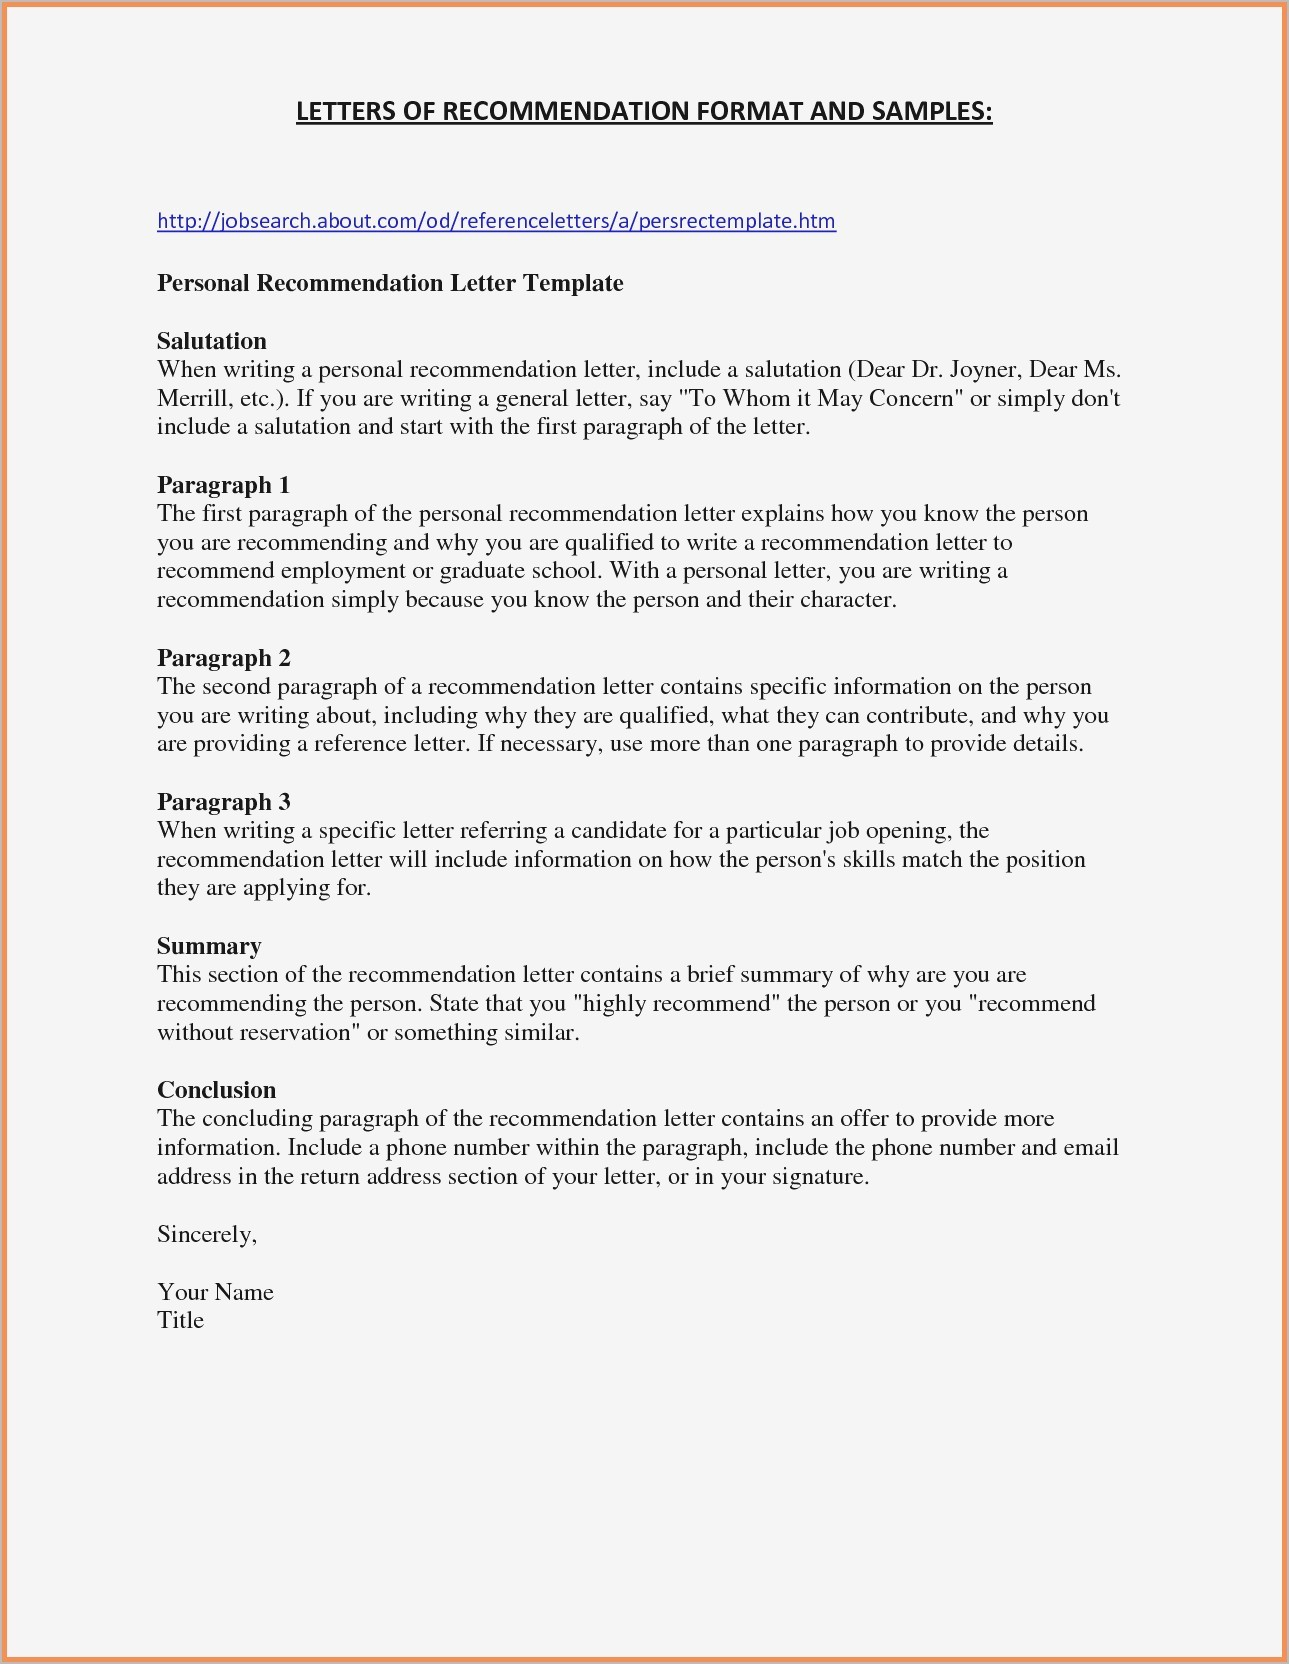 Free Letter Of Recommendation Template - Job Letter Re Mendation Template Best Free Letter Re Mendation